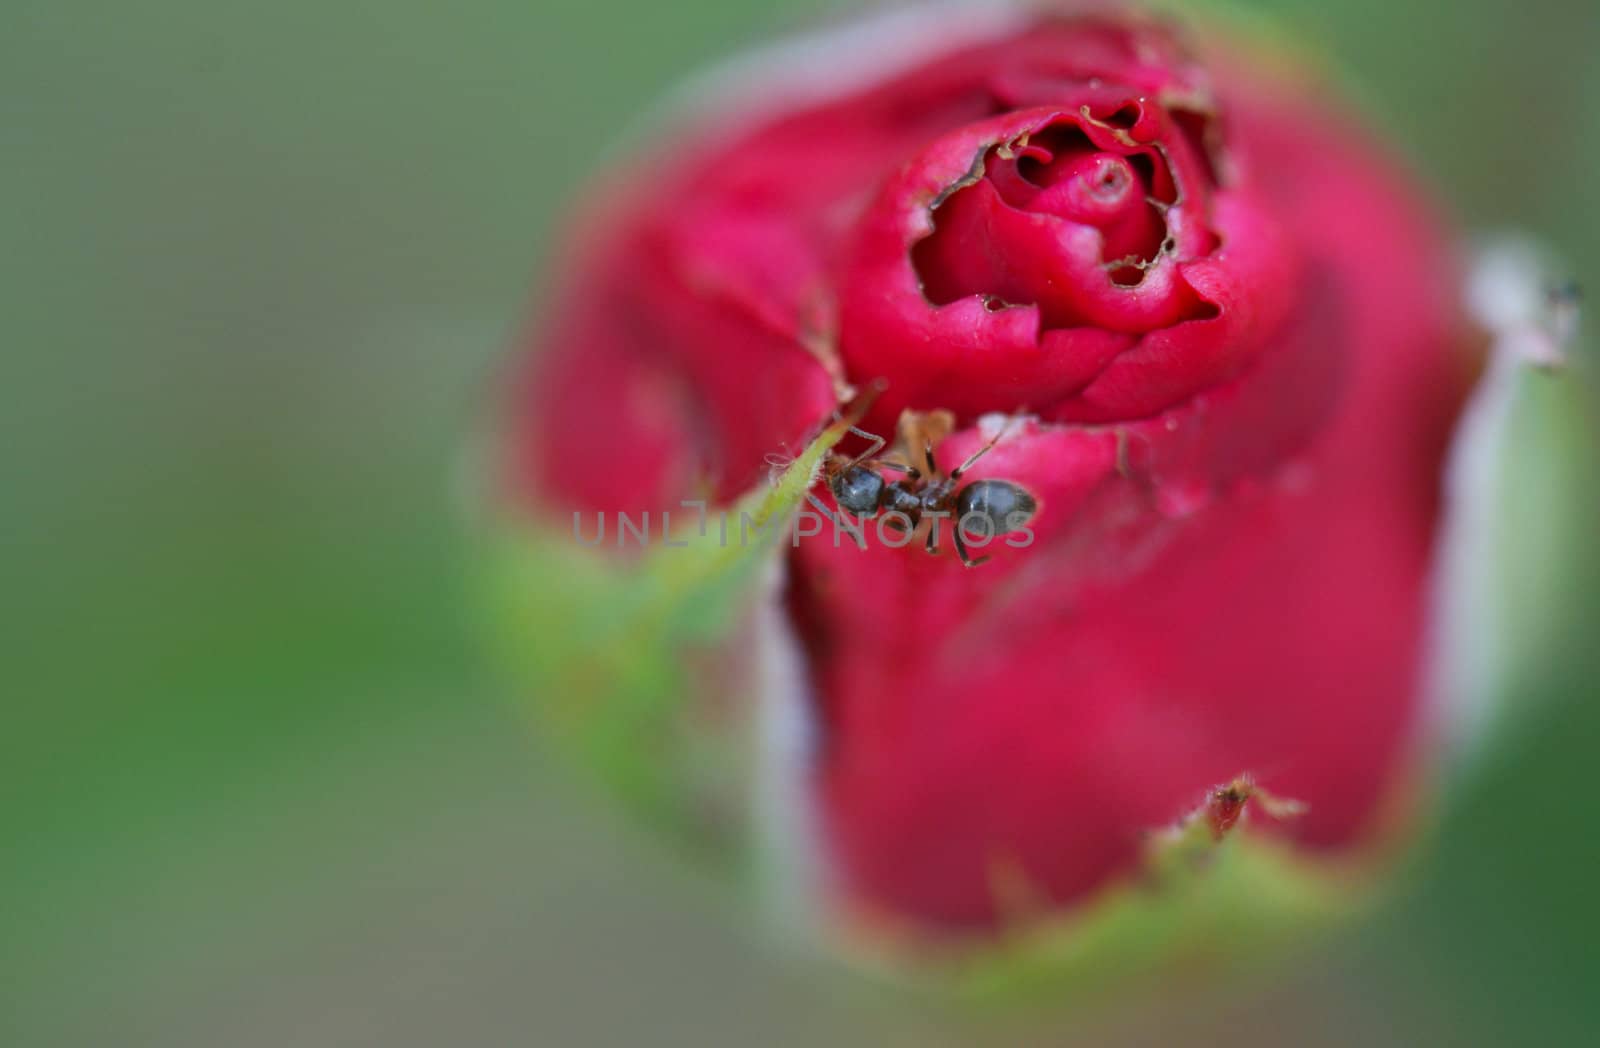 Ant photographed walking to the flower.